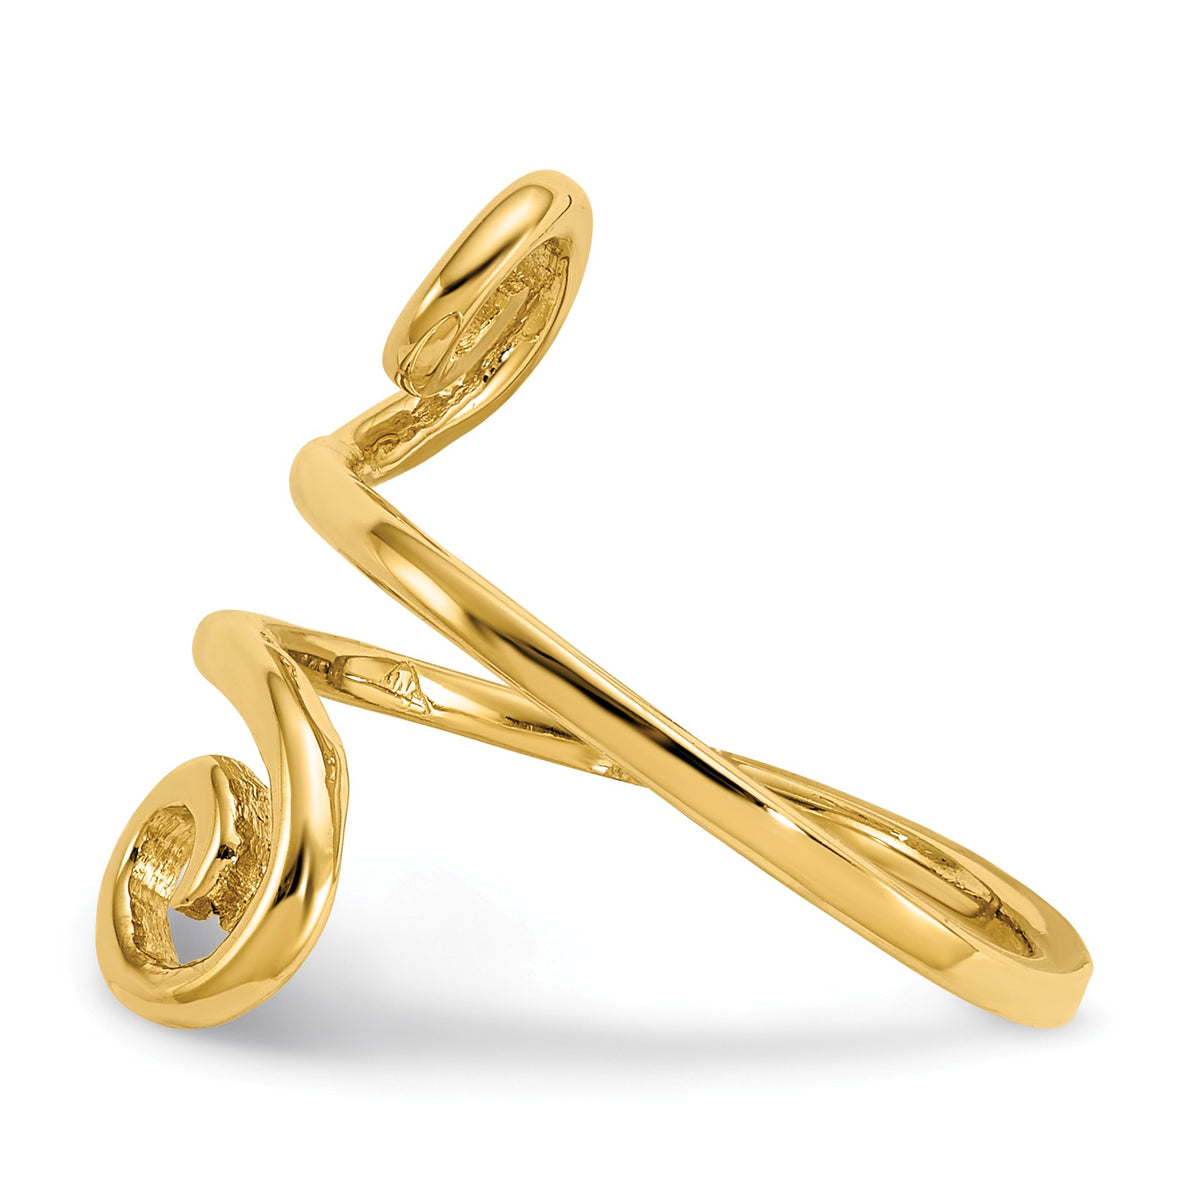 Alternate view of the Swirl Toe Adjustable Ring in 14 Karat Gold by The Black Bow Jewelry Co.